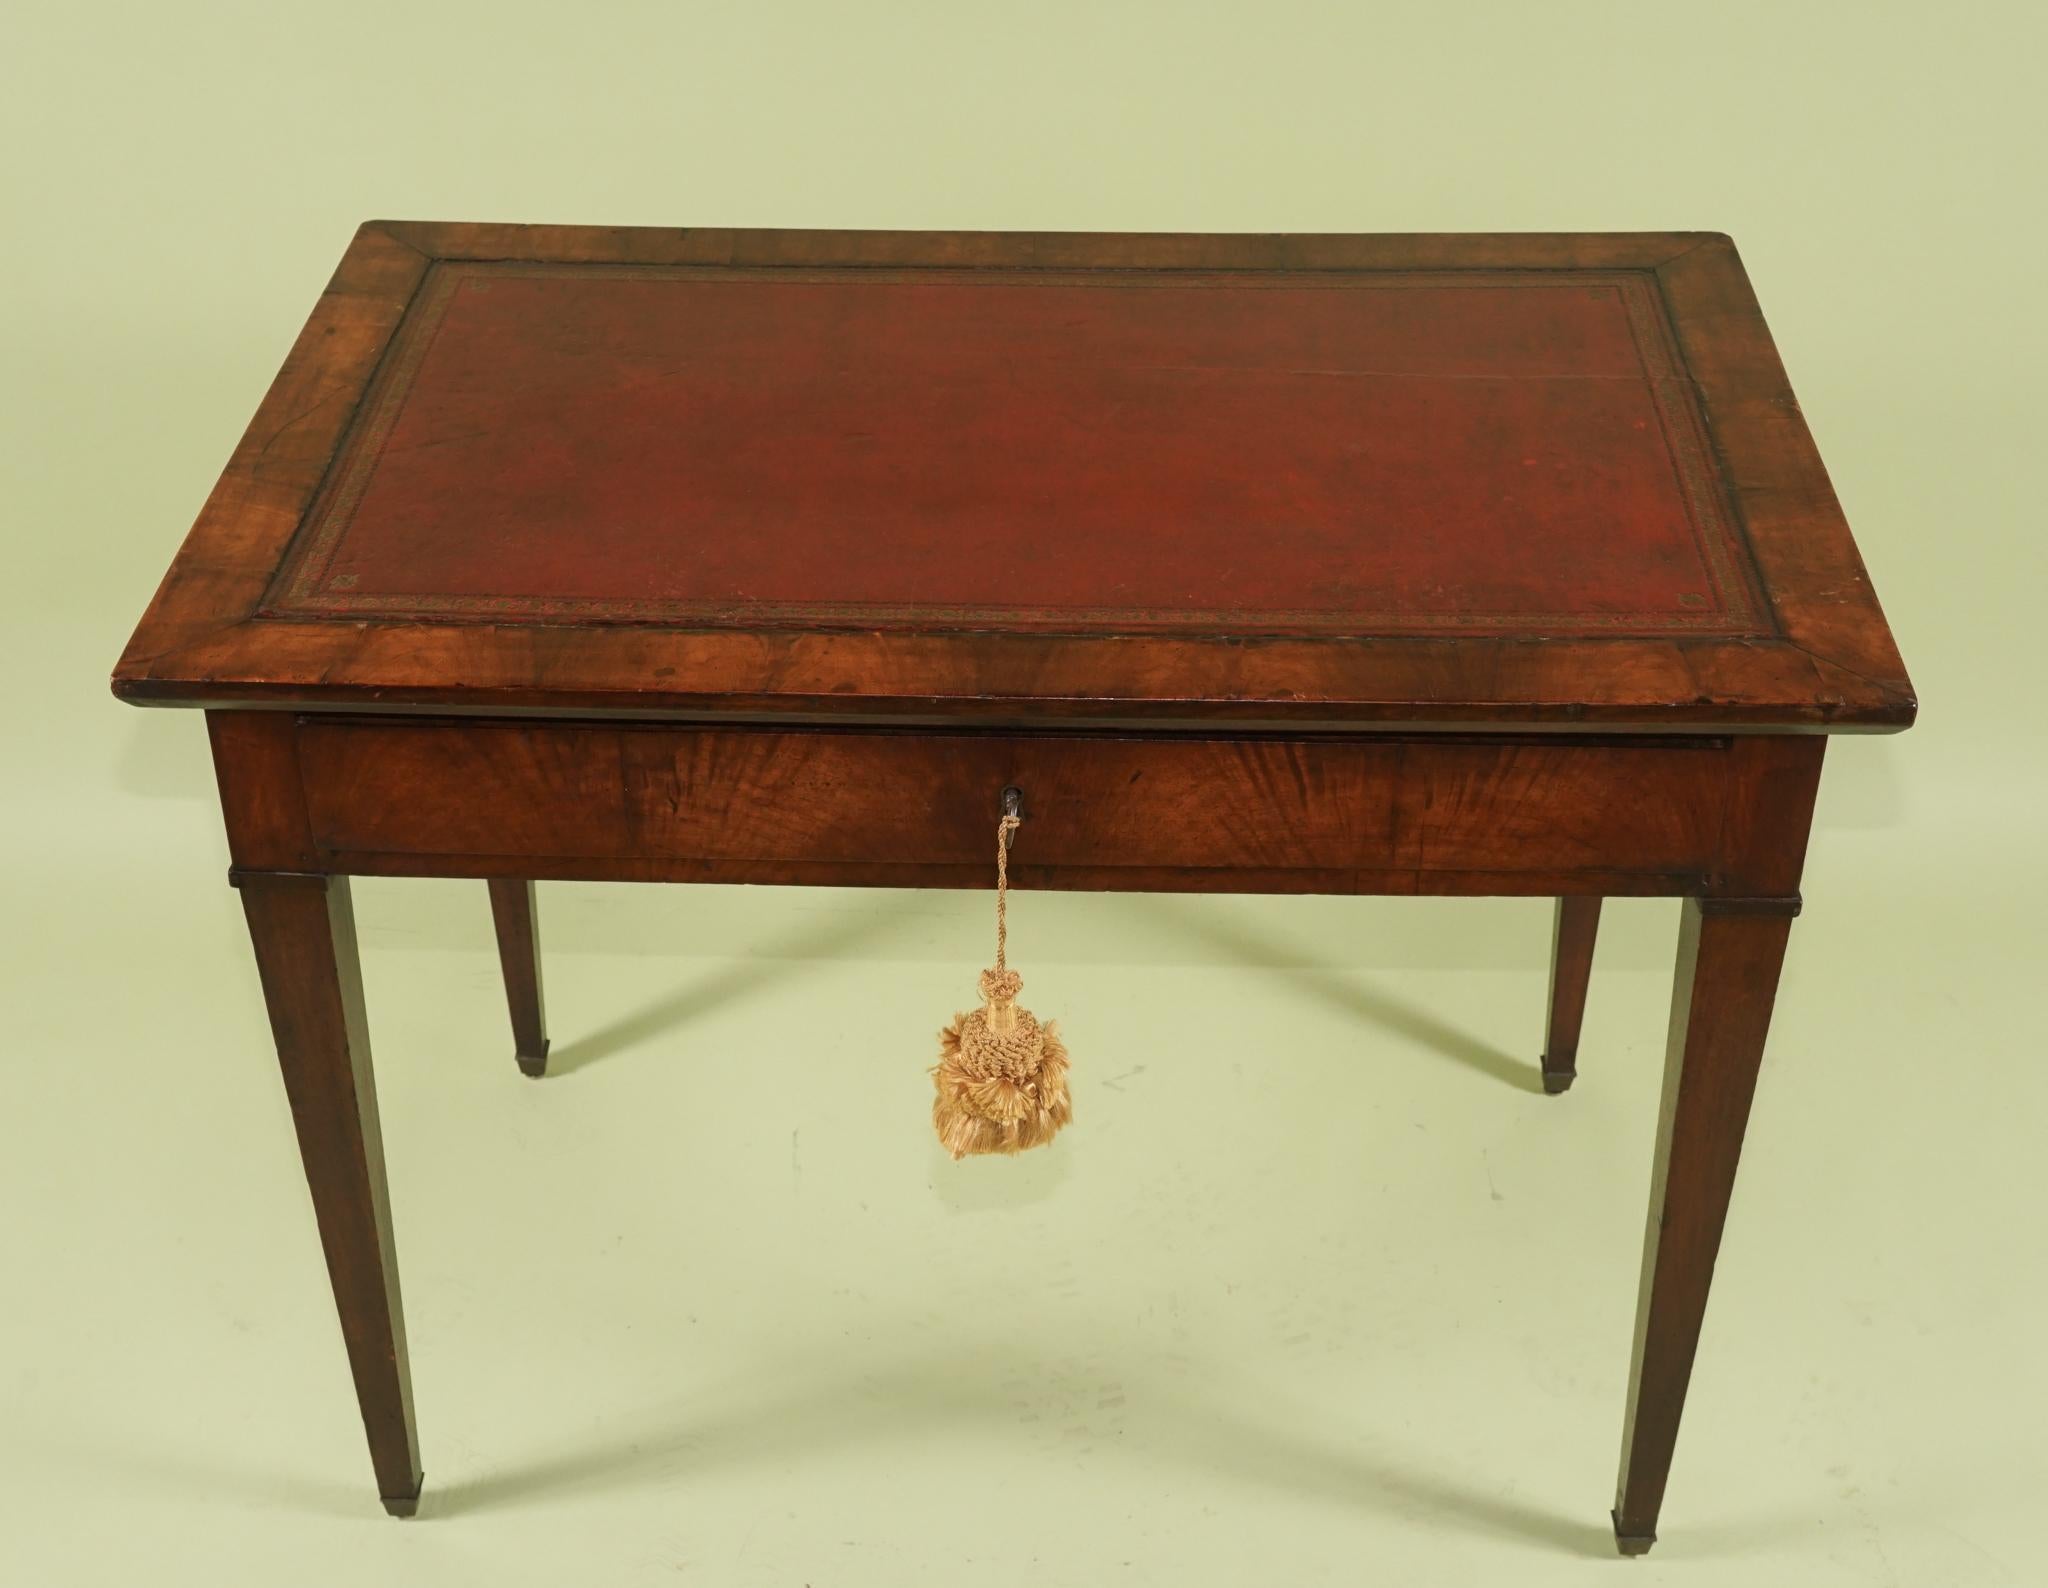 This beautiful period writing table was constructed in France circa 1790 to 1800 of rich imported mahogany and the woods have been carefully selected to create an overall pattern of flaming grain around the apron of the table. The top is covered in